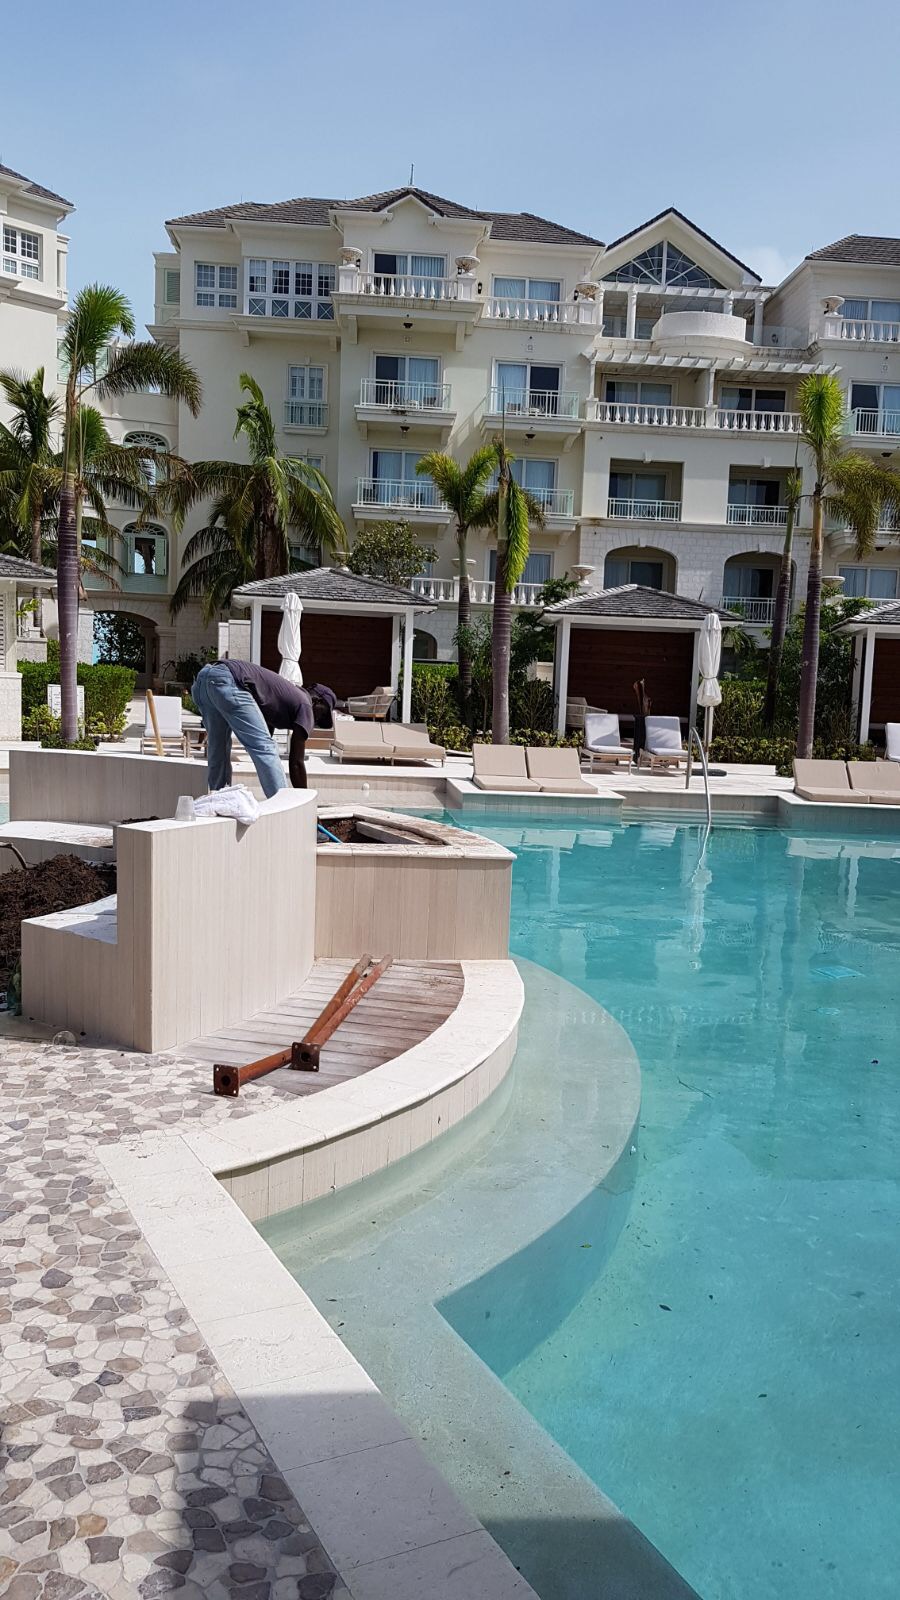 A glimpse of the stunning colonnade pool.